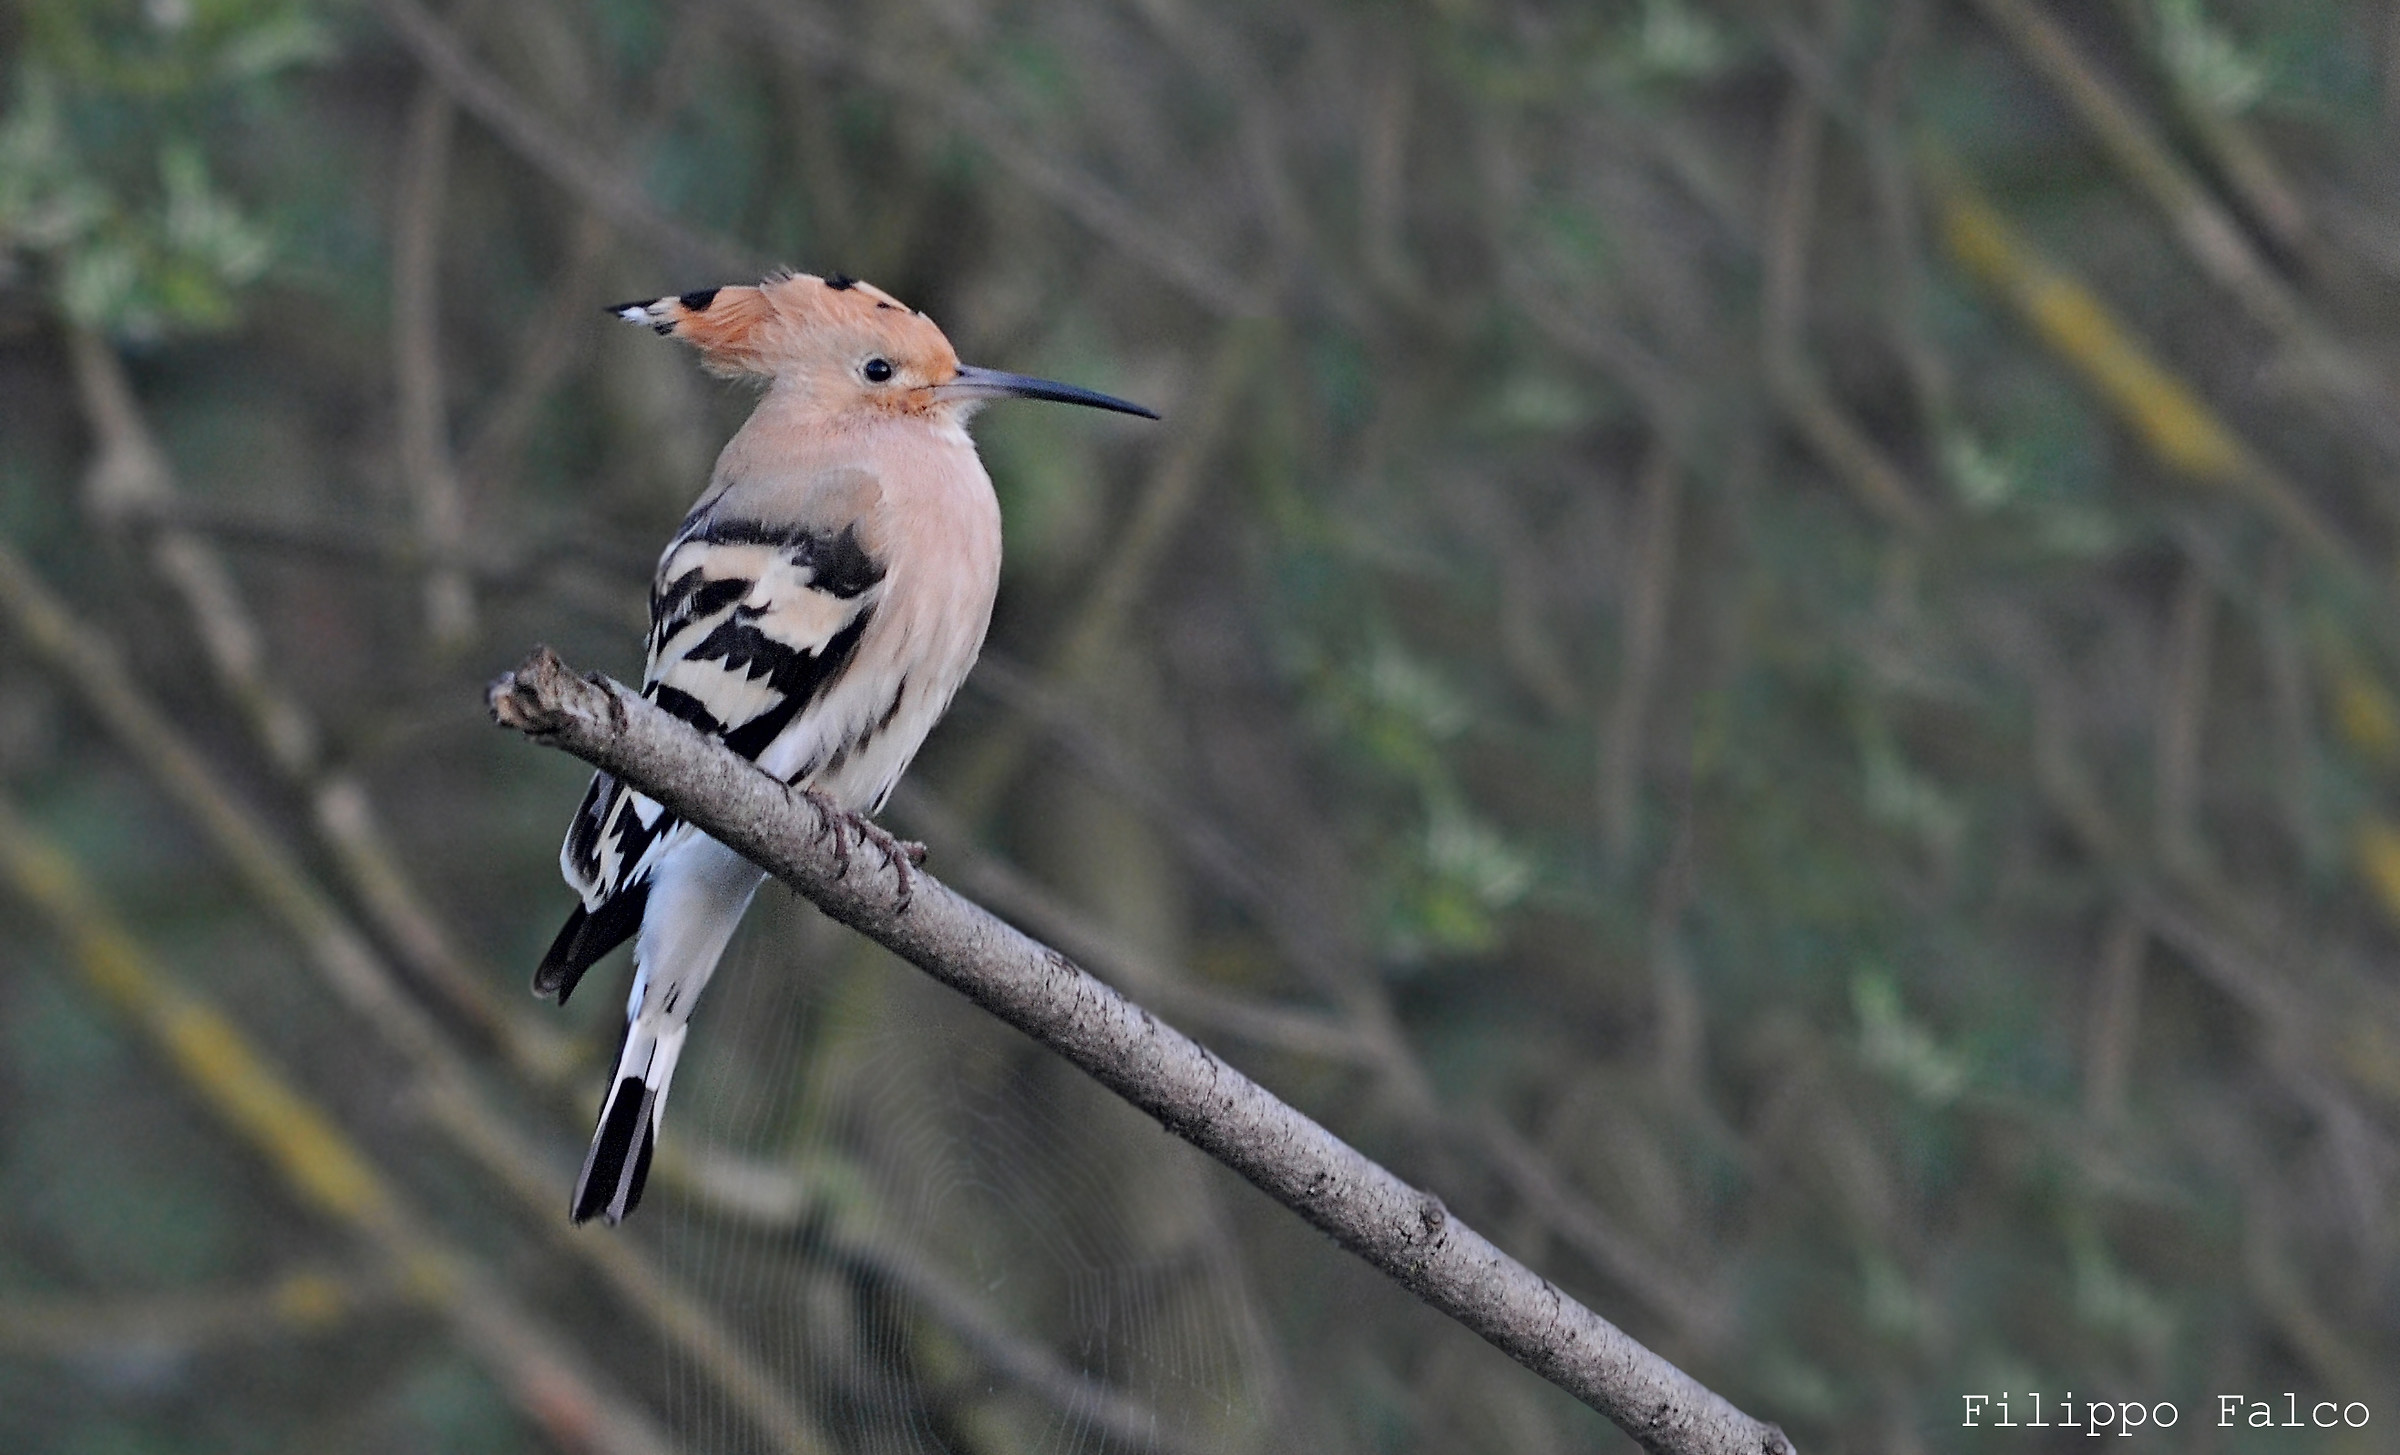 The hoopoe and the web ......